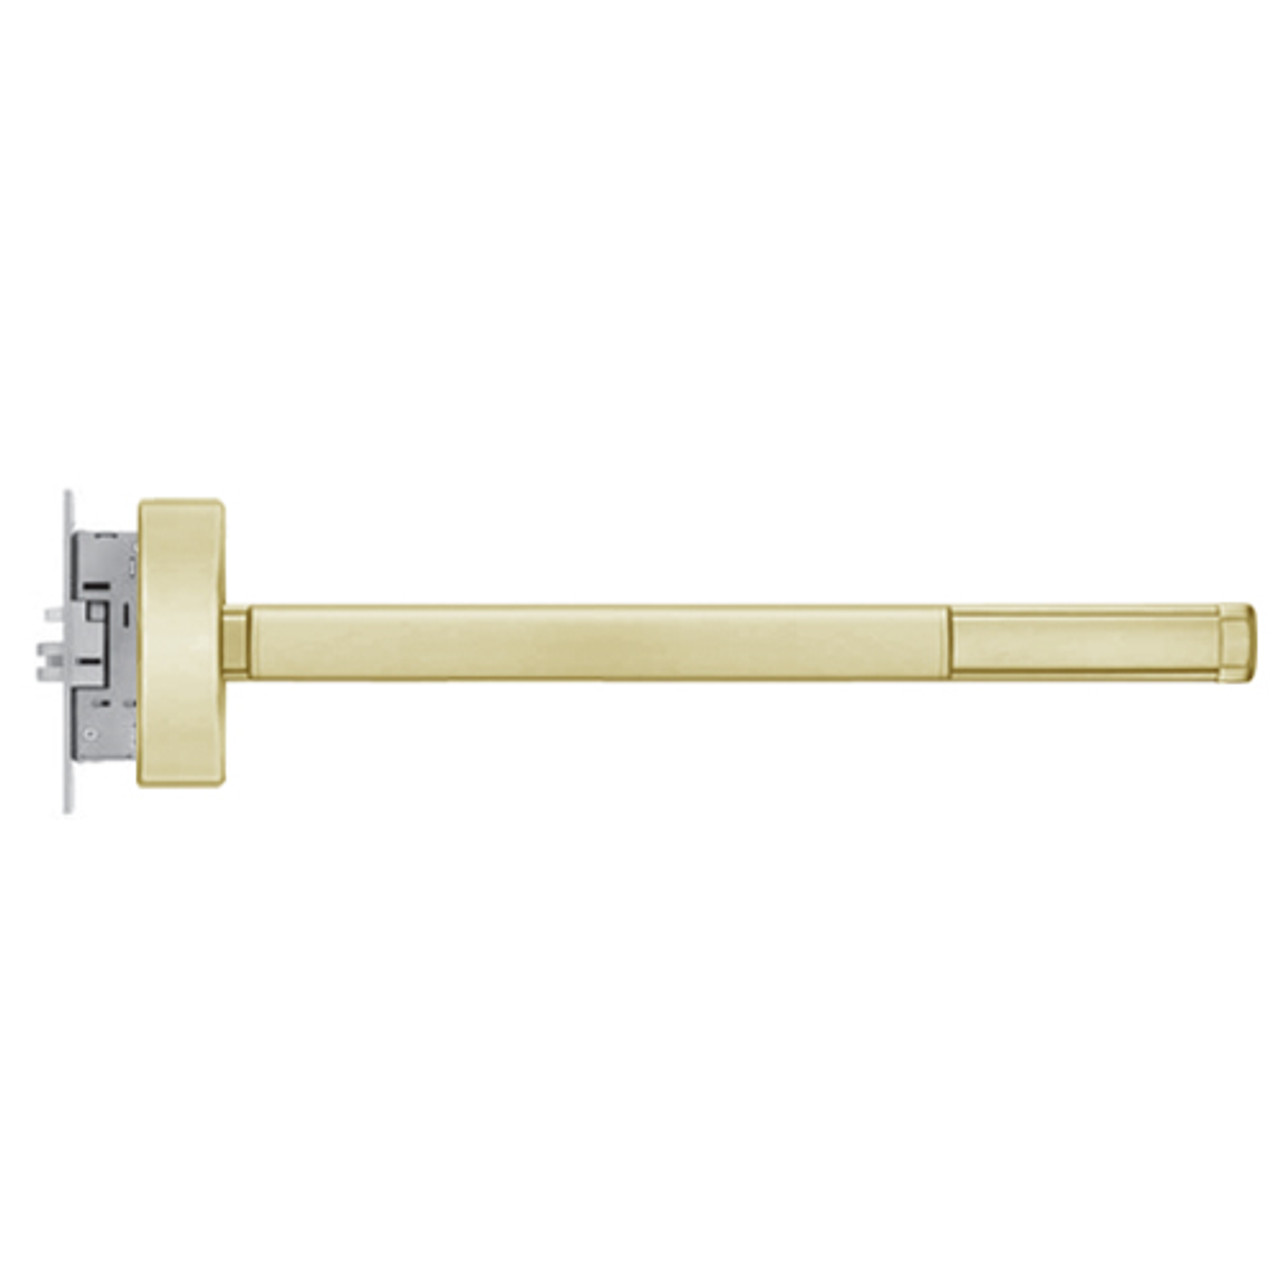 MLR2305-RHR-606-36 PHI 2300 Series Apex Mortise Exit Device with Motorized Latch Retraction Prepped for Key Controls Thumb Piece in Satin Brass Finish